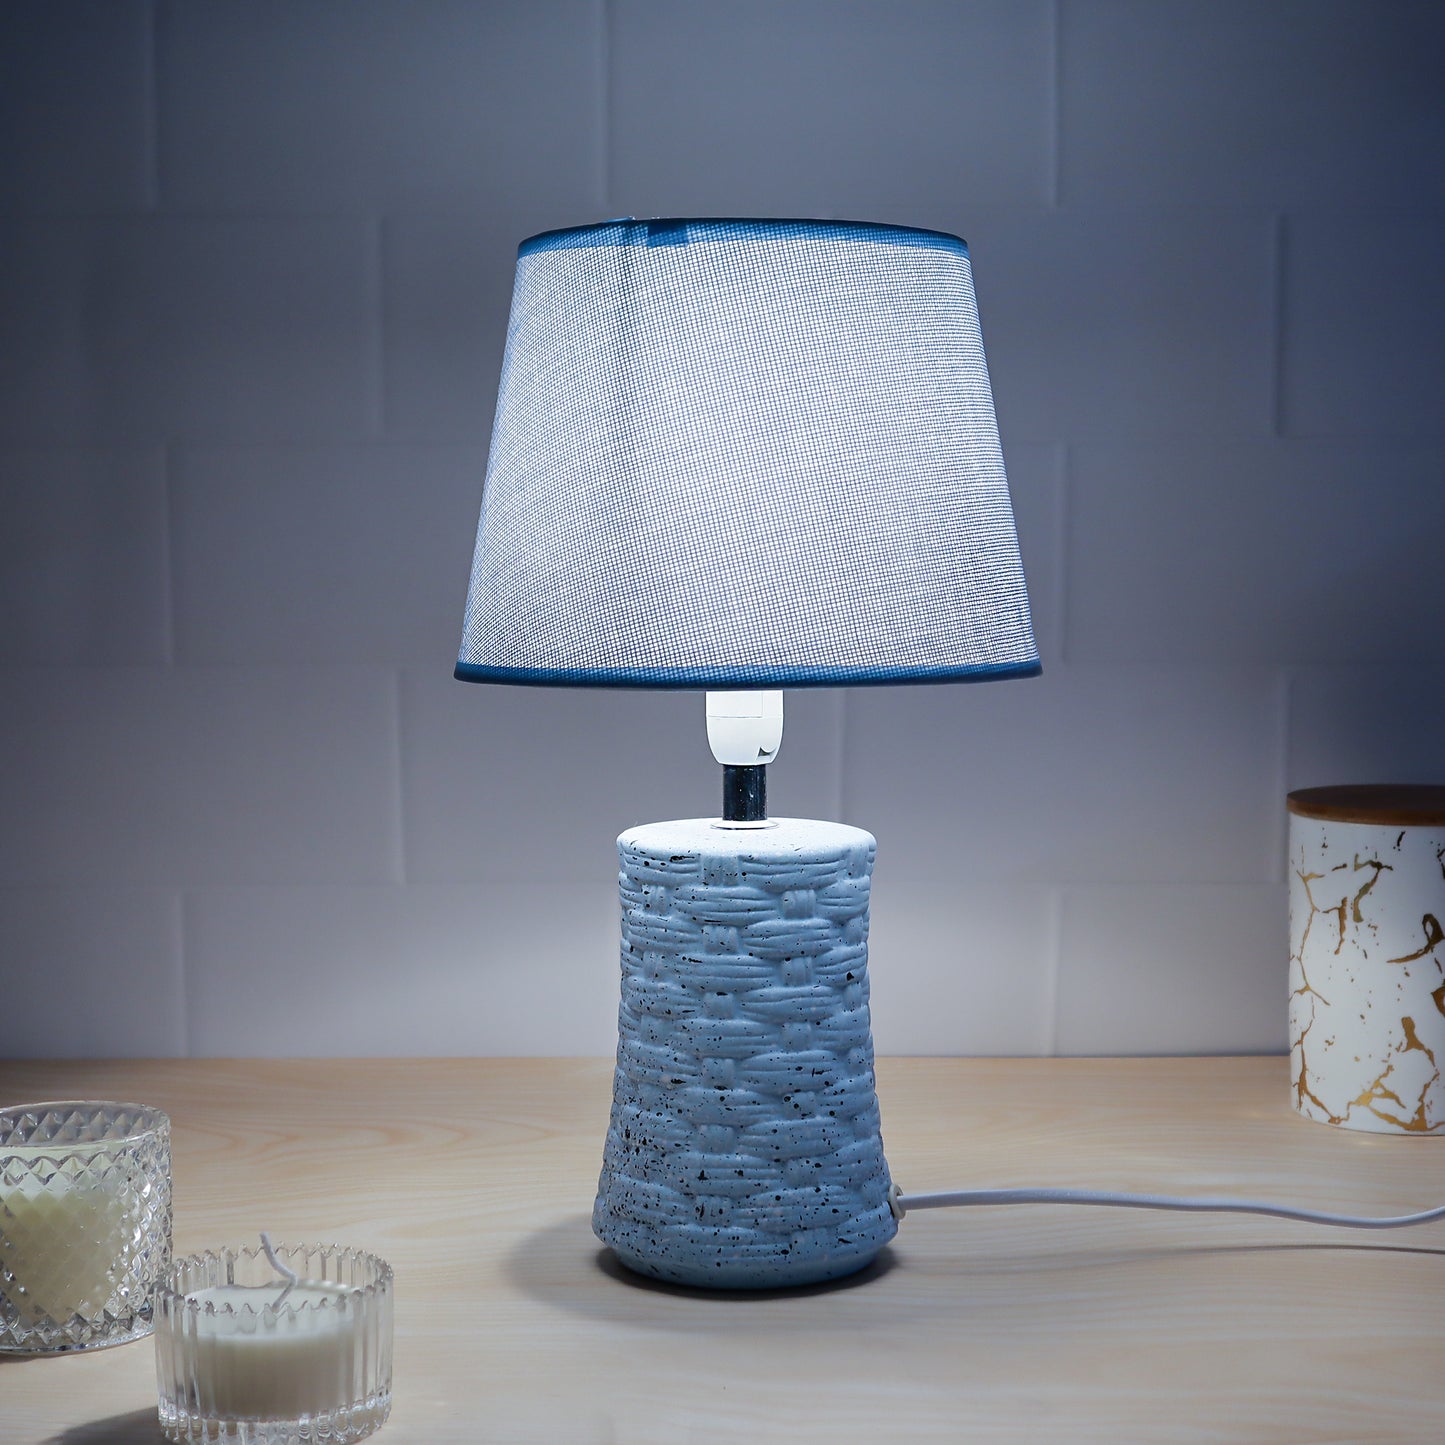 ceramic table lamp with textured base and neutral shade, adding warmth to any room décor